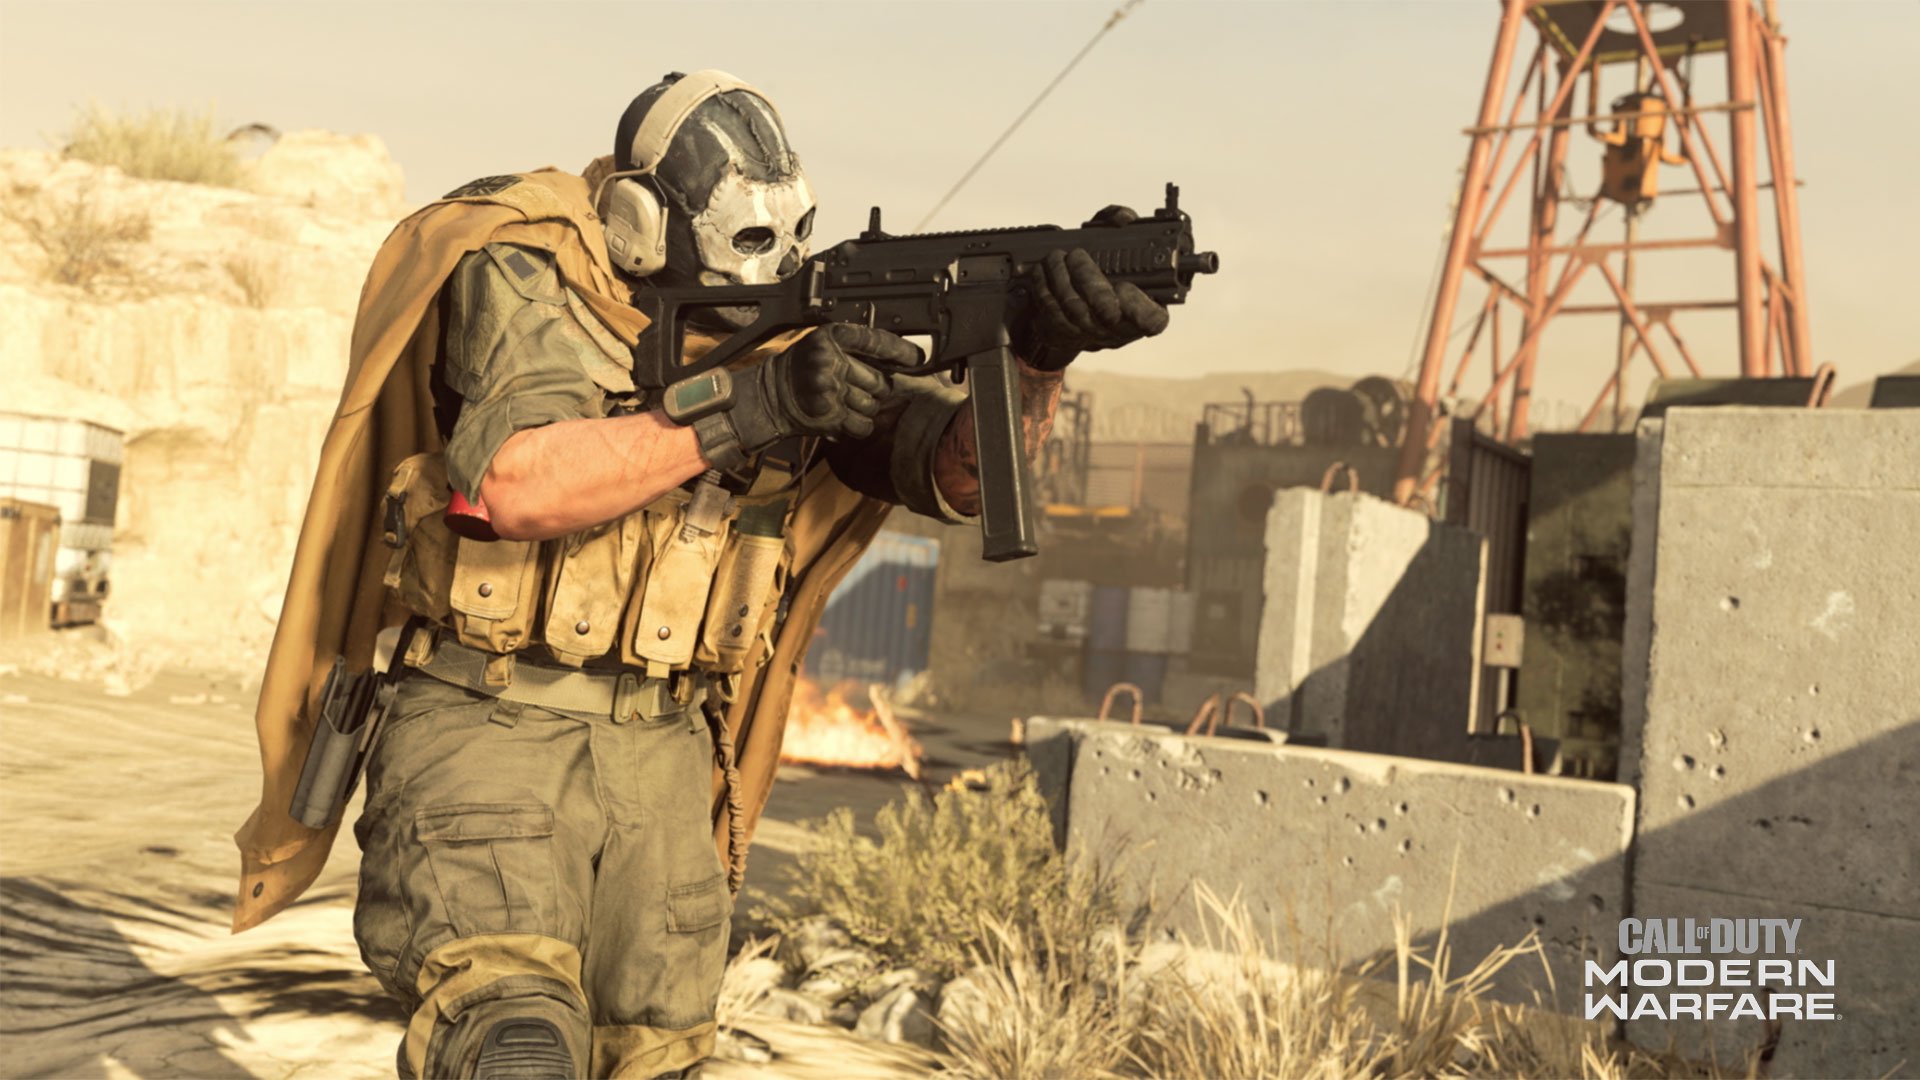 Activision has cut ties with COD's Ghost voice actor following sexist remarks